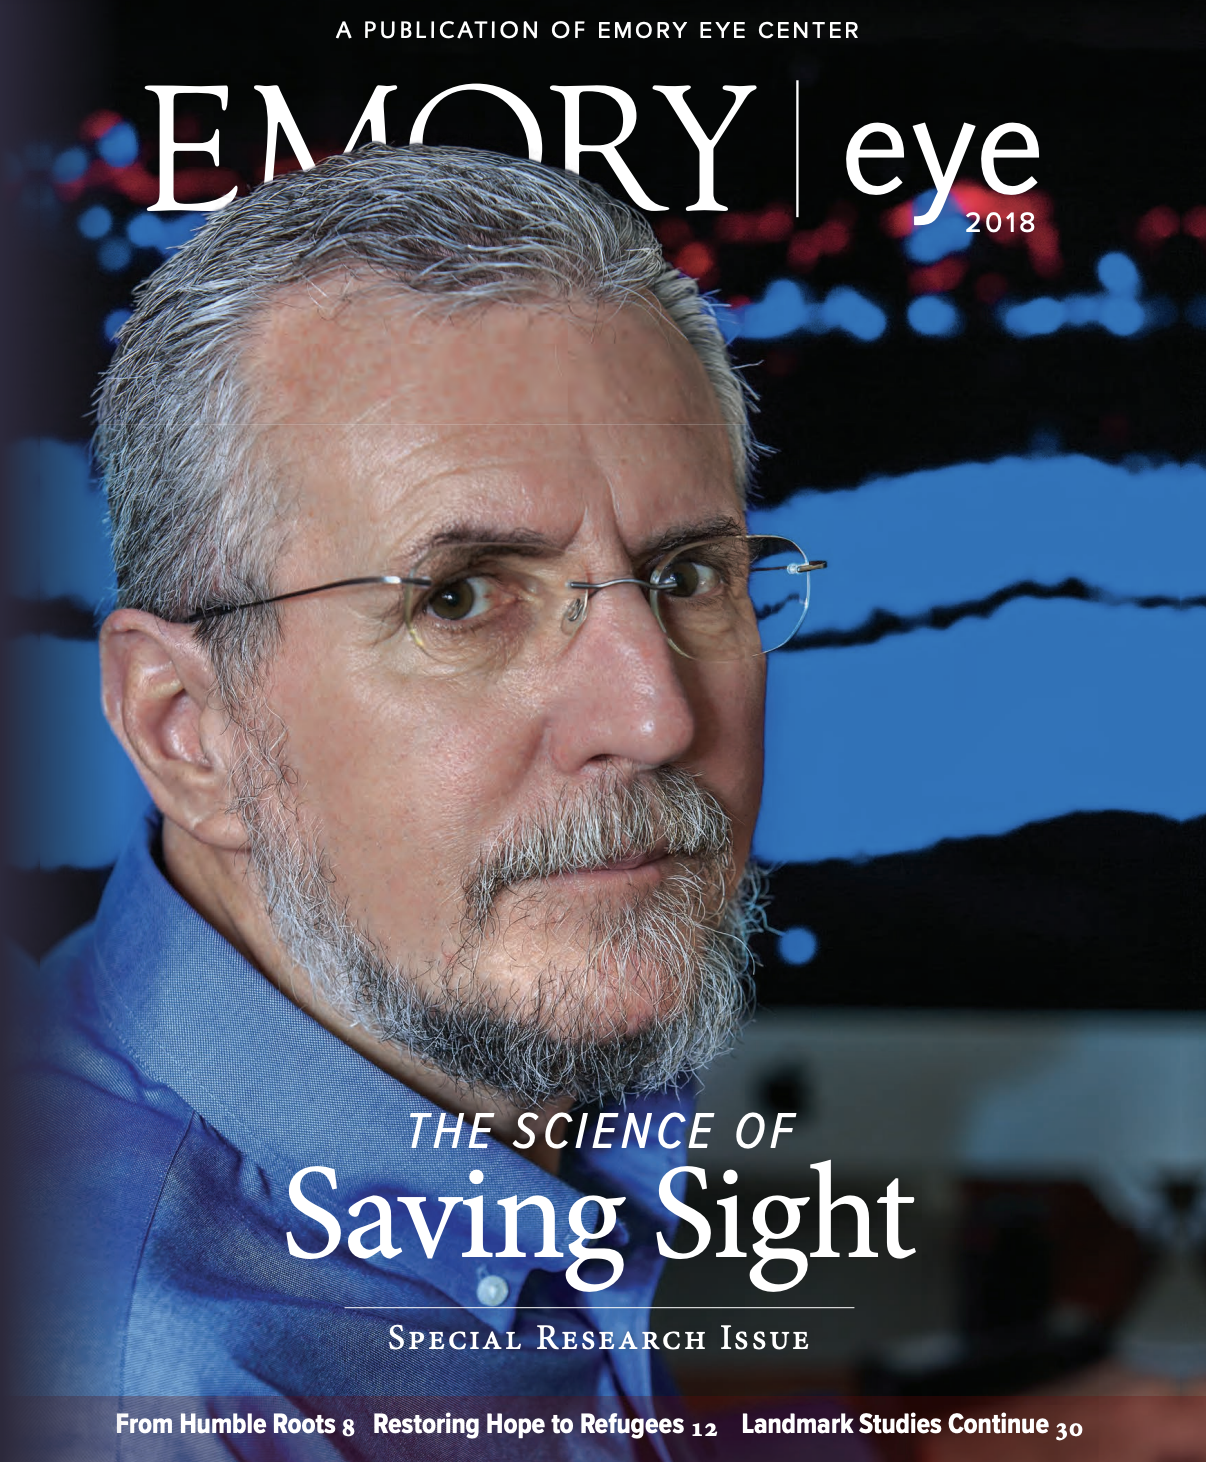 2018-19 Magazine Cover with phot of Prof. Mike Iuvone entitled "The Science of Saving Sight"